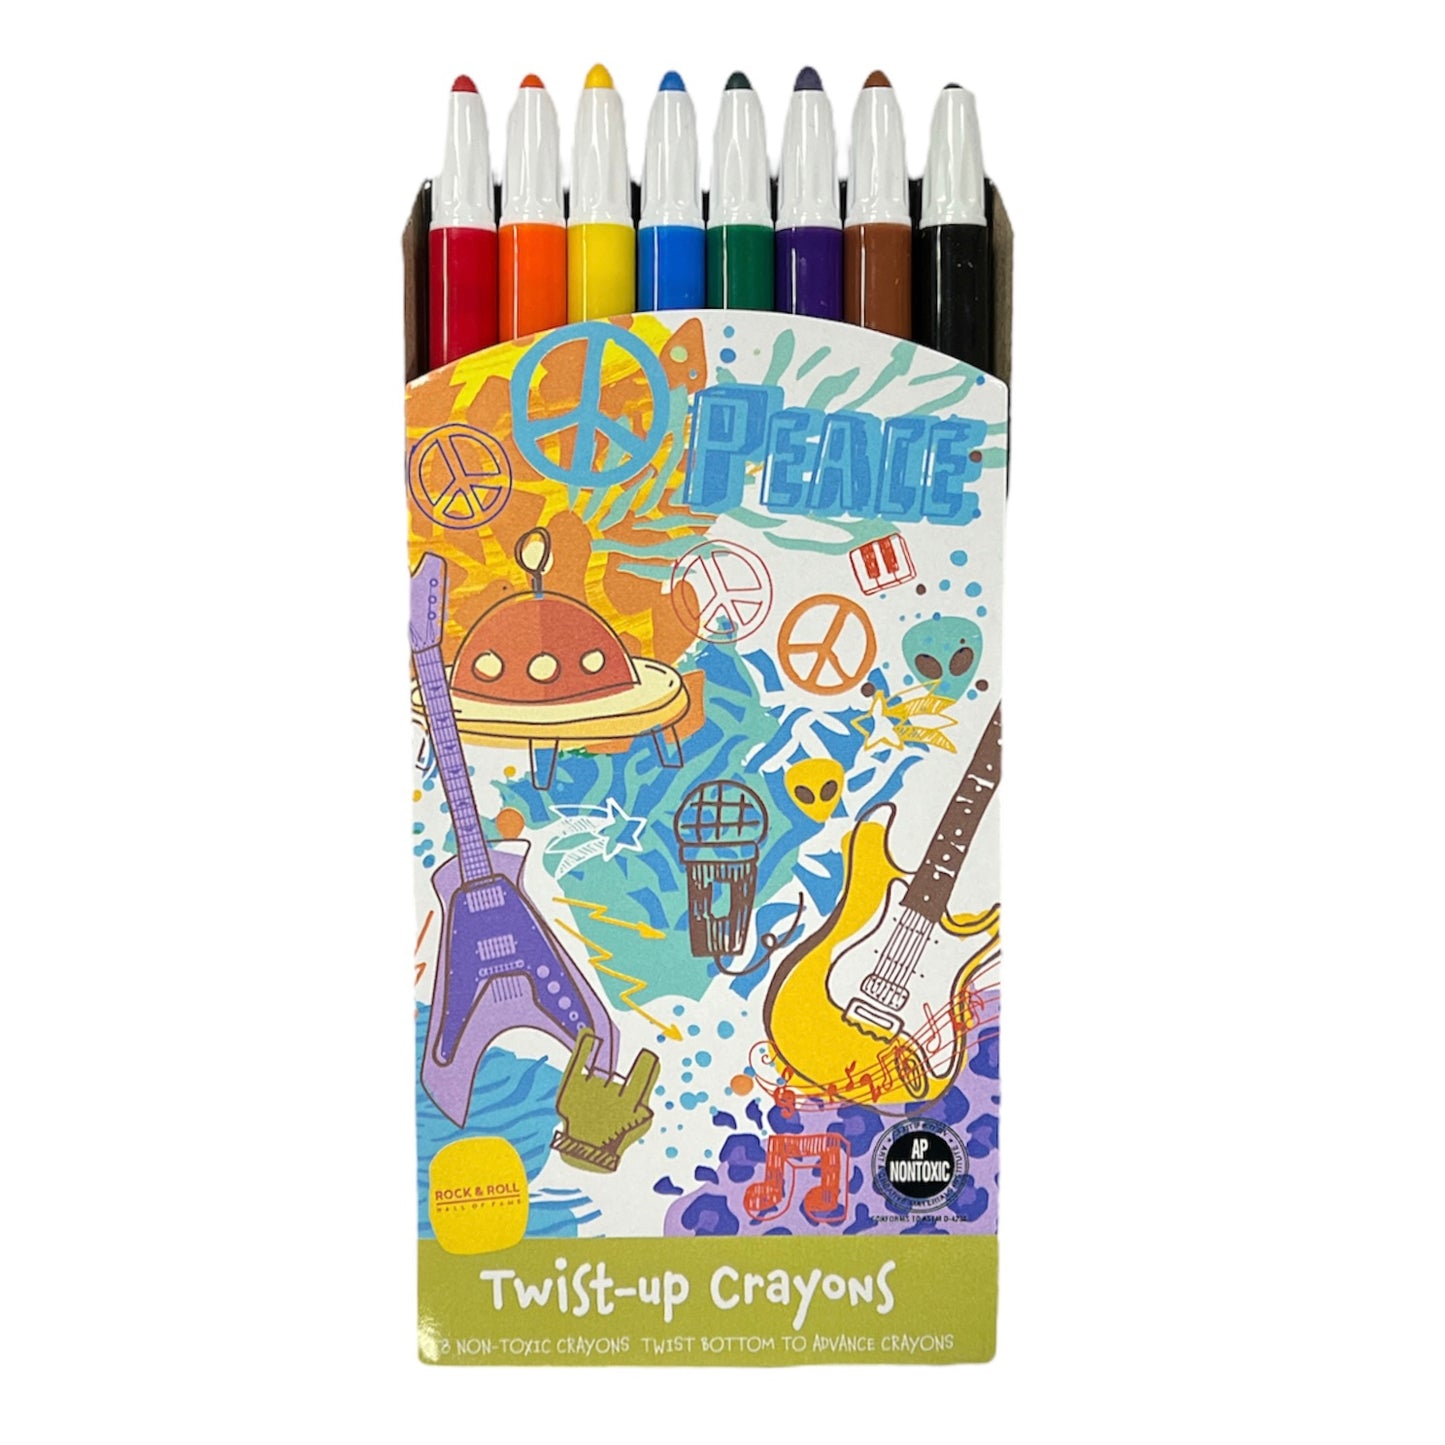 ROCK HALL PACK OF 8 TWIST UP CRAYONS